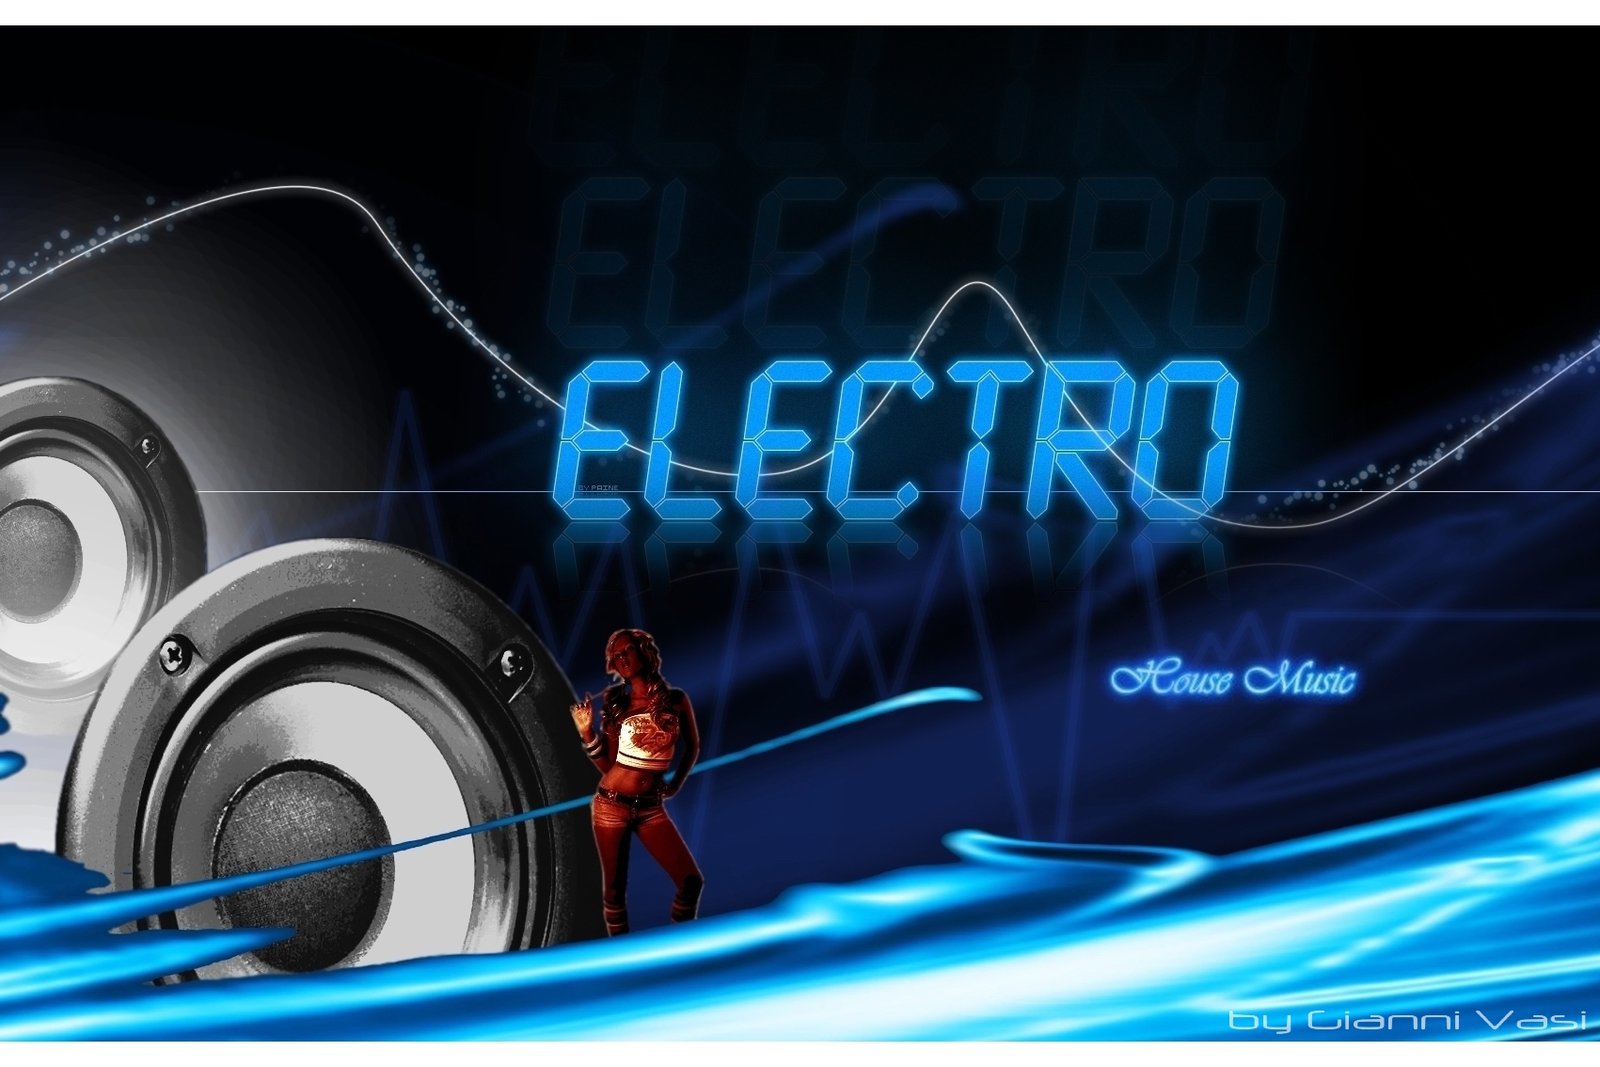 Electro House Music Poster By Giannivasi Customization Wallpaper Other